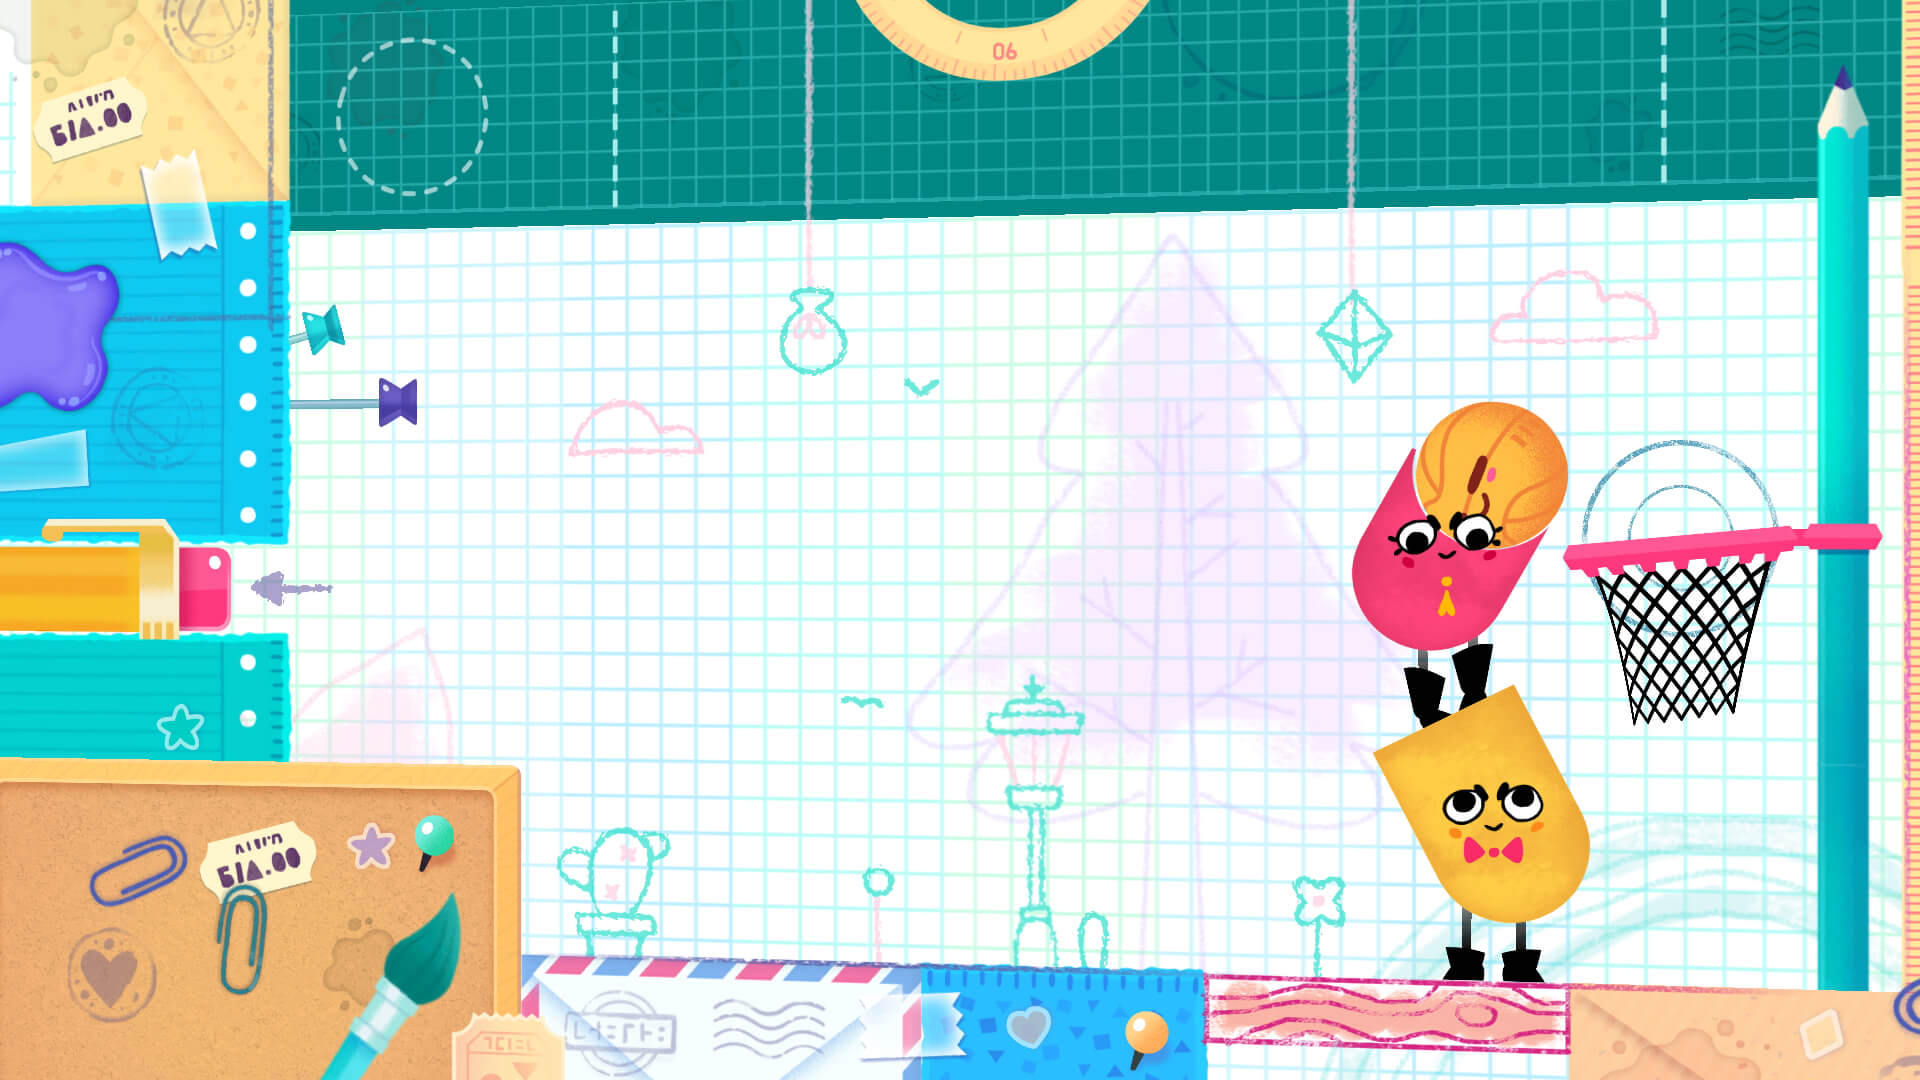 Snipperclips - Cut it out, together! is a new puzzle title for Nintendo Switch. 